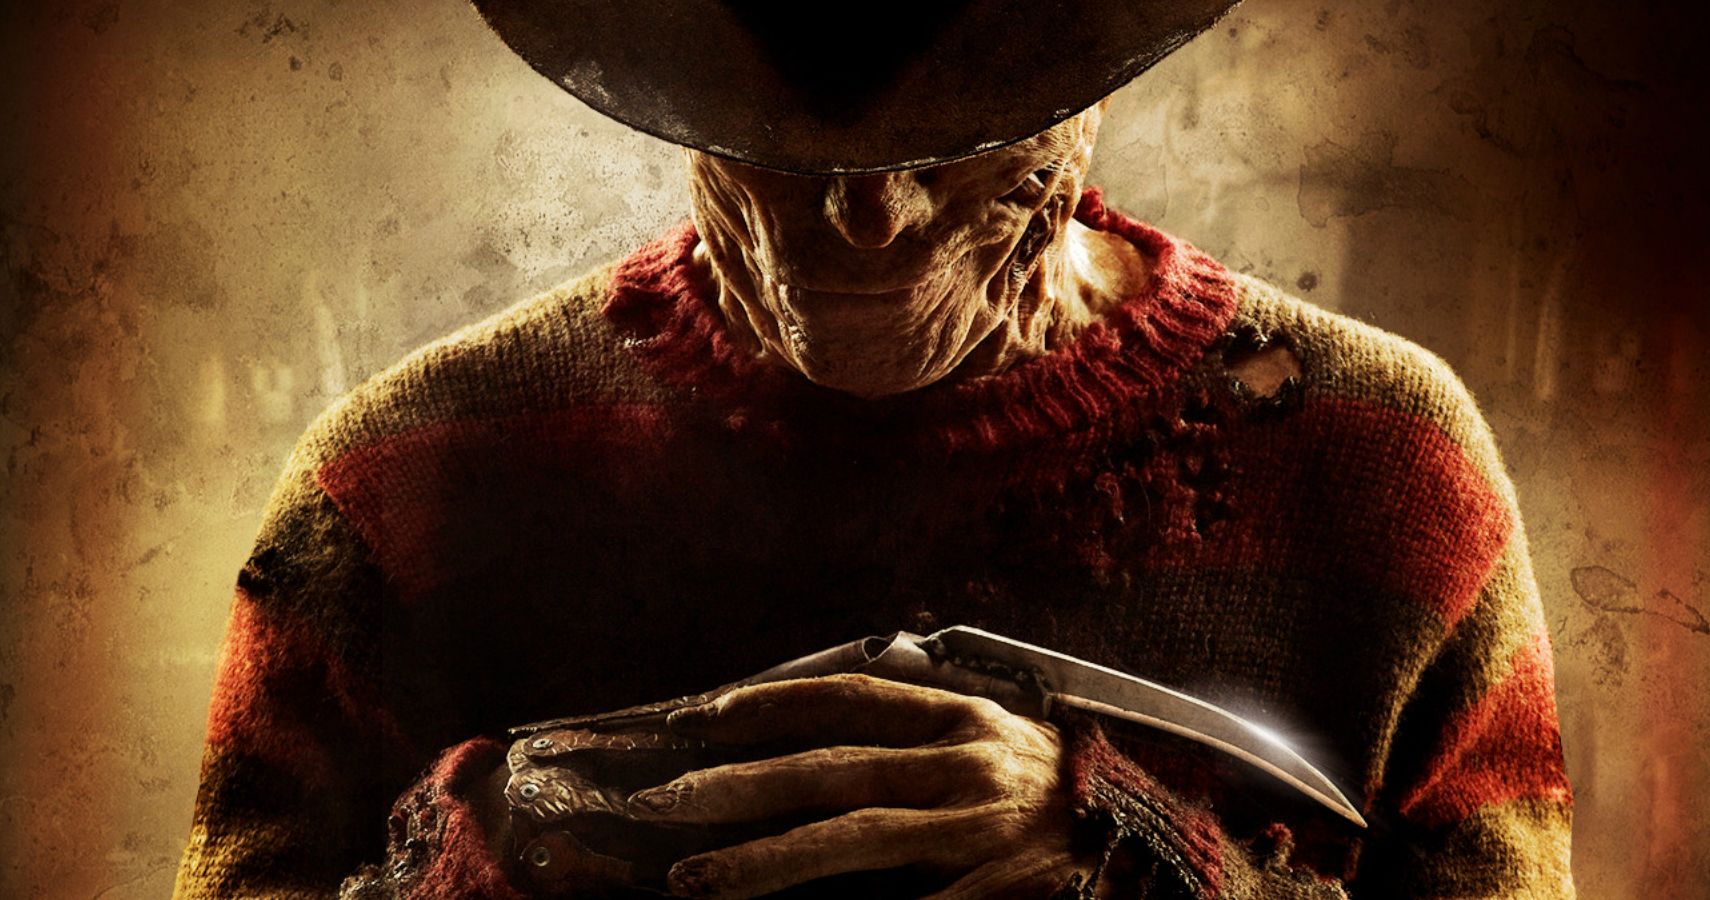 10 Things You Didn’t Know About A Nightmare On Elm Street (2010)